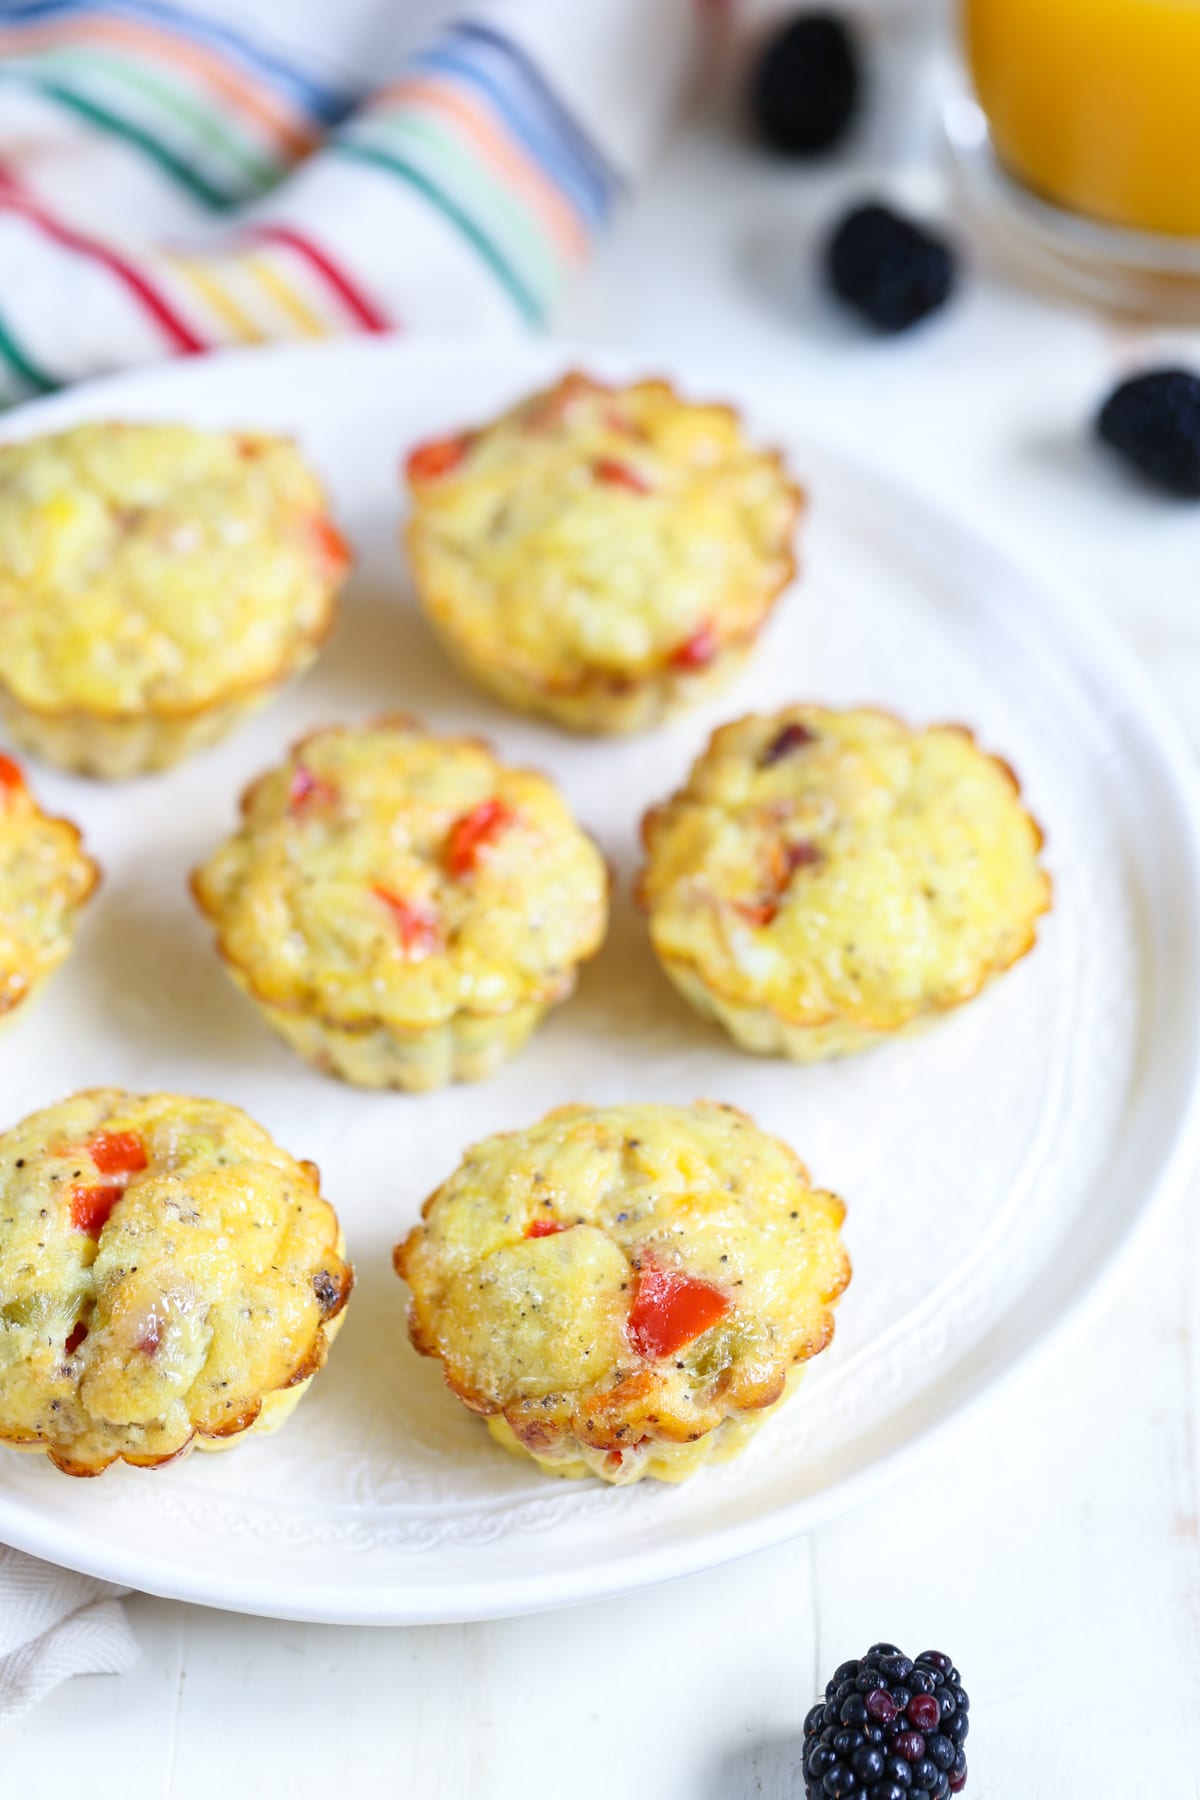 Omelet cups are the ultimate make-ahead busy morning meal or lunch. They will last well for 2 months in the freezer and in the fridge for 3-4 days. Just reheat the egg cups and serve. Easy peasy, healthy, and scrumptious!